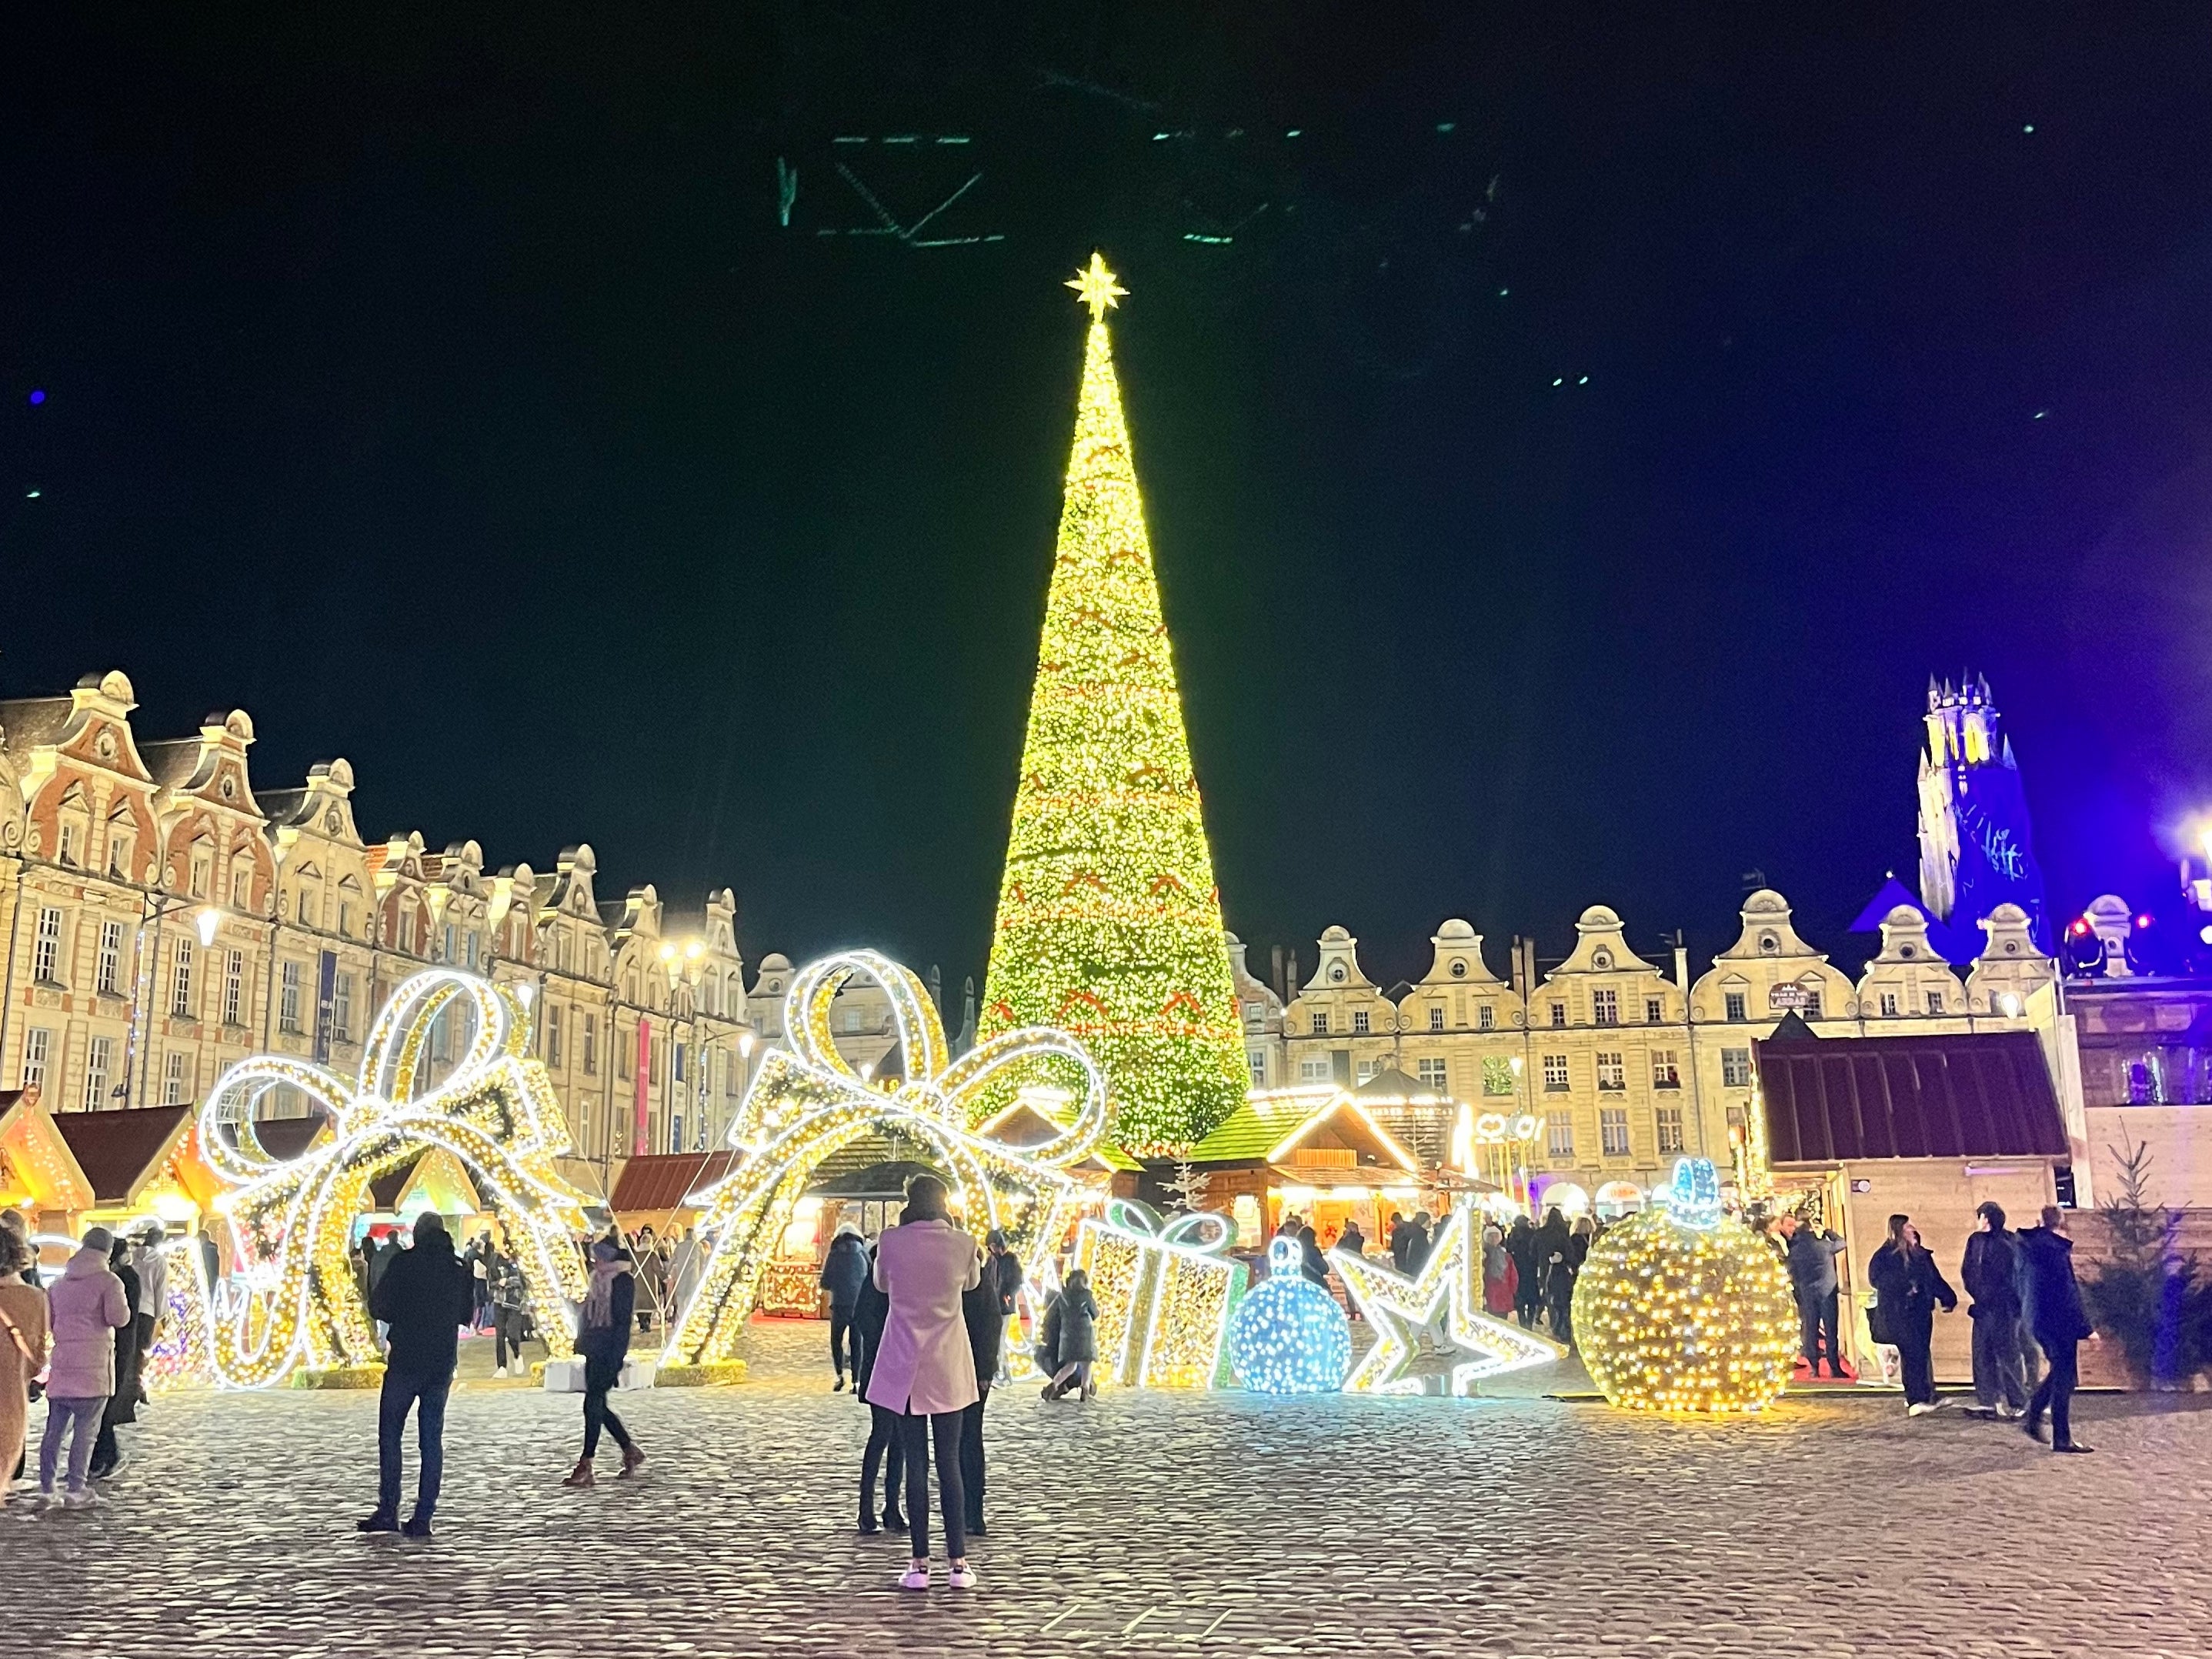 <p>It’s beginning to look a lot like Christmas in Arras, France’s unsung festive hotspot</p>